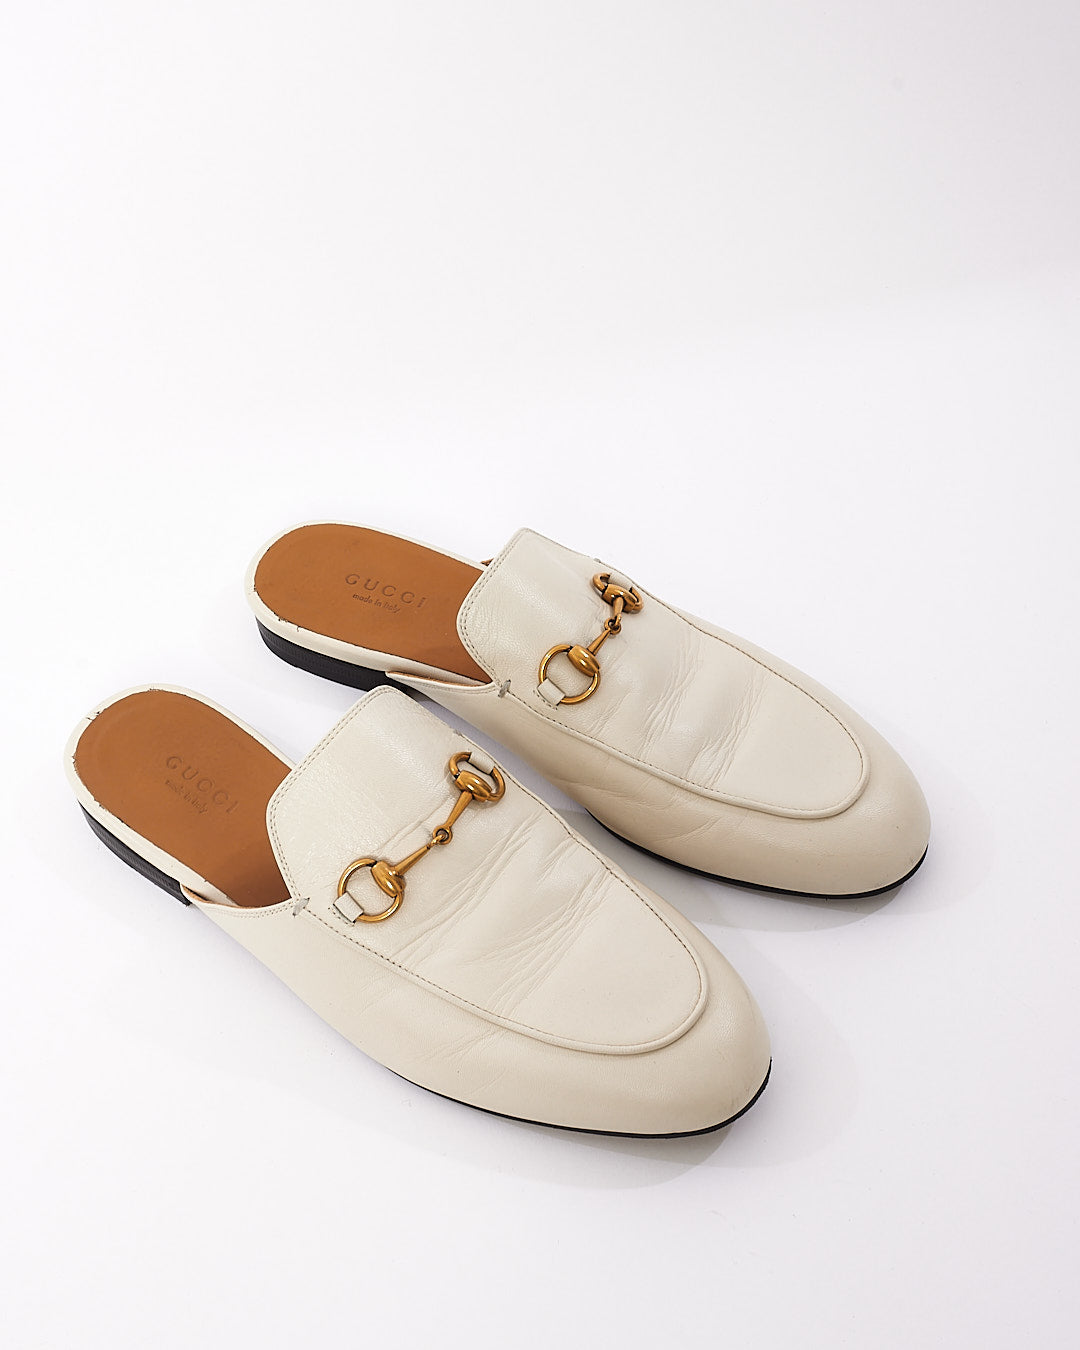 Gucci Cream Leather Princetown Loafer Slip On Flats - 38